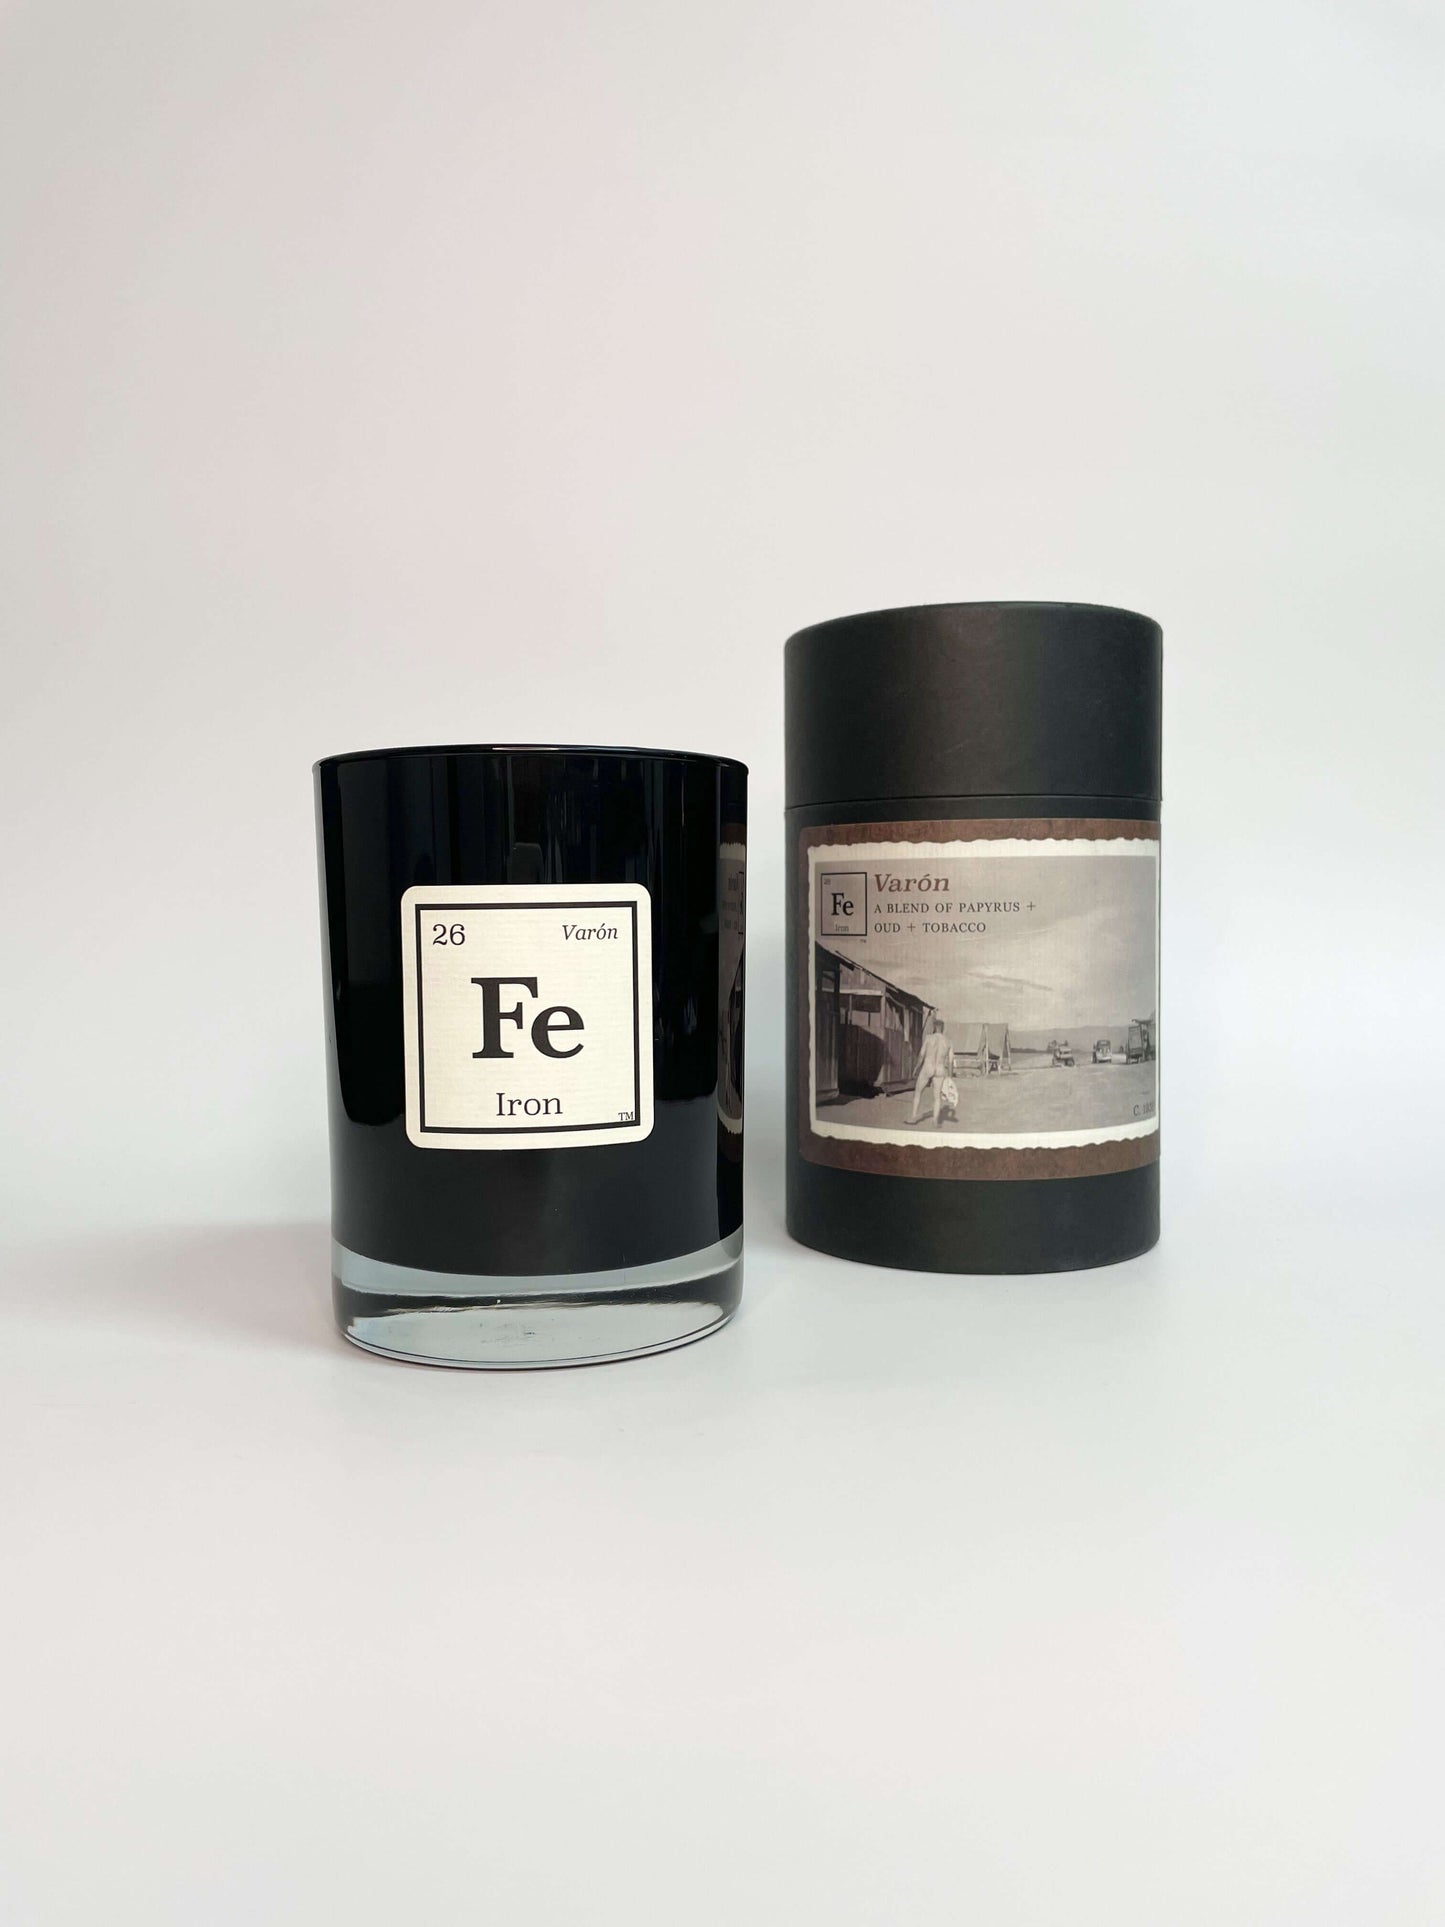 Iron Varon Oud Wood + Papyrus + Tobacco Candle